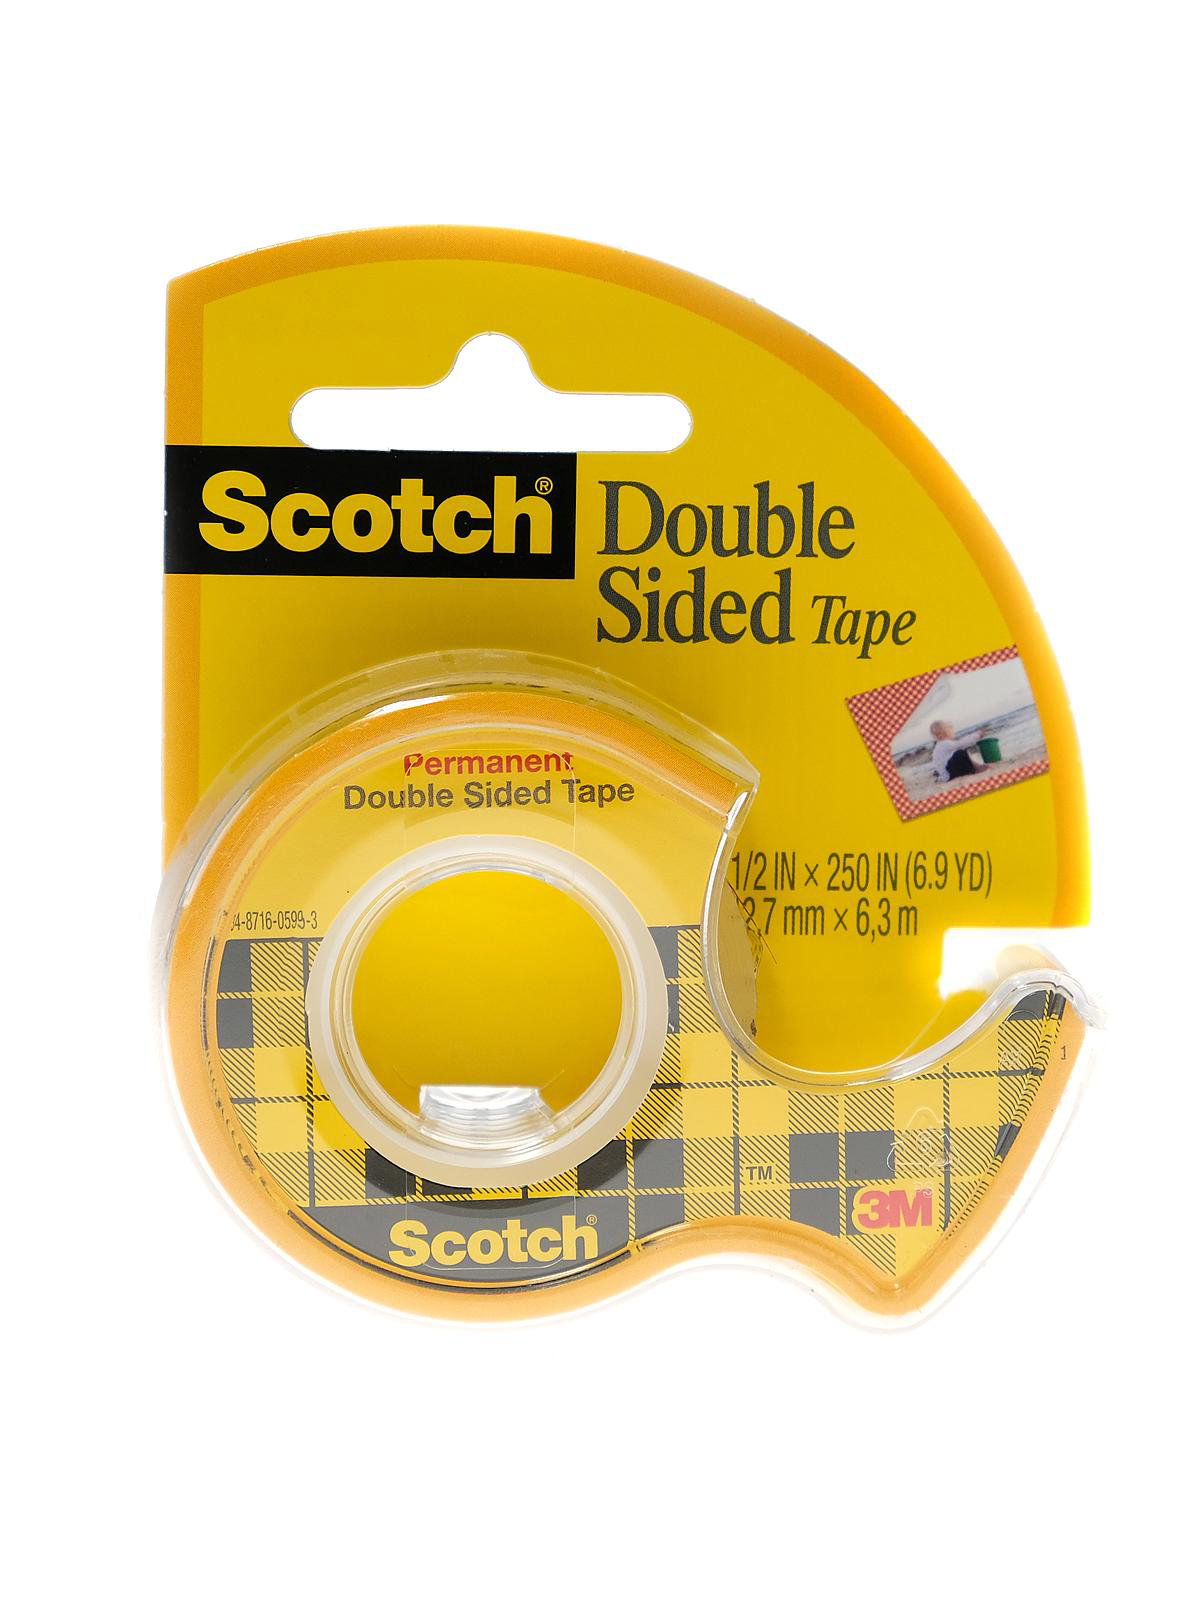 Premium Double-Sided Tape permanent 3mm x 20m - buy now